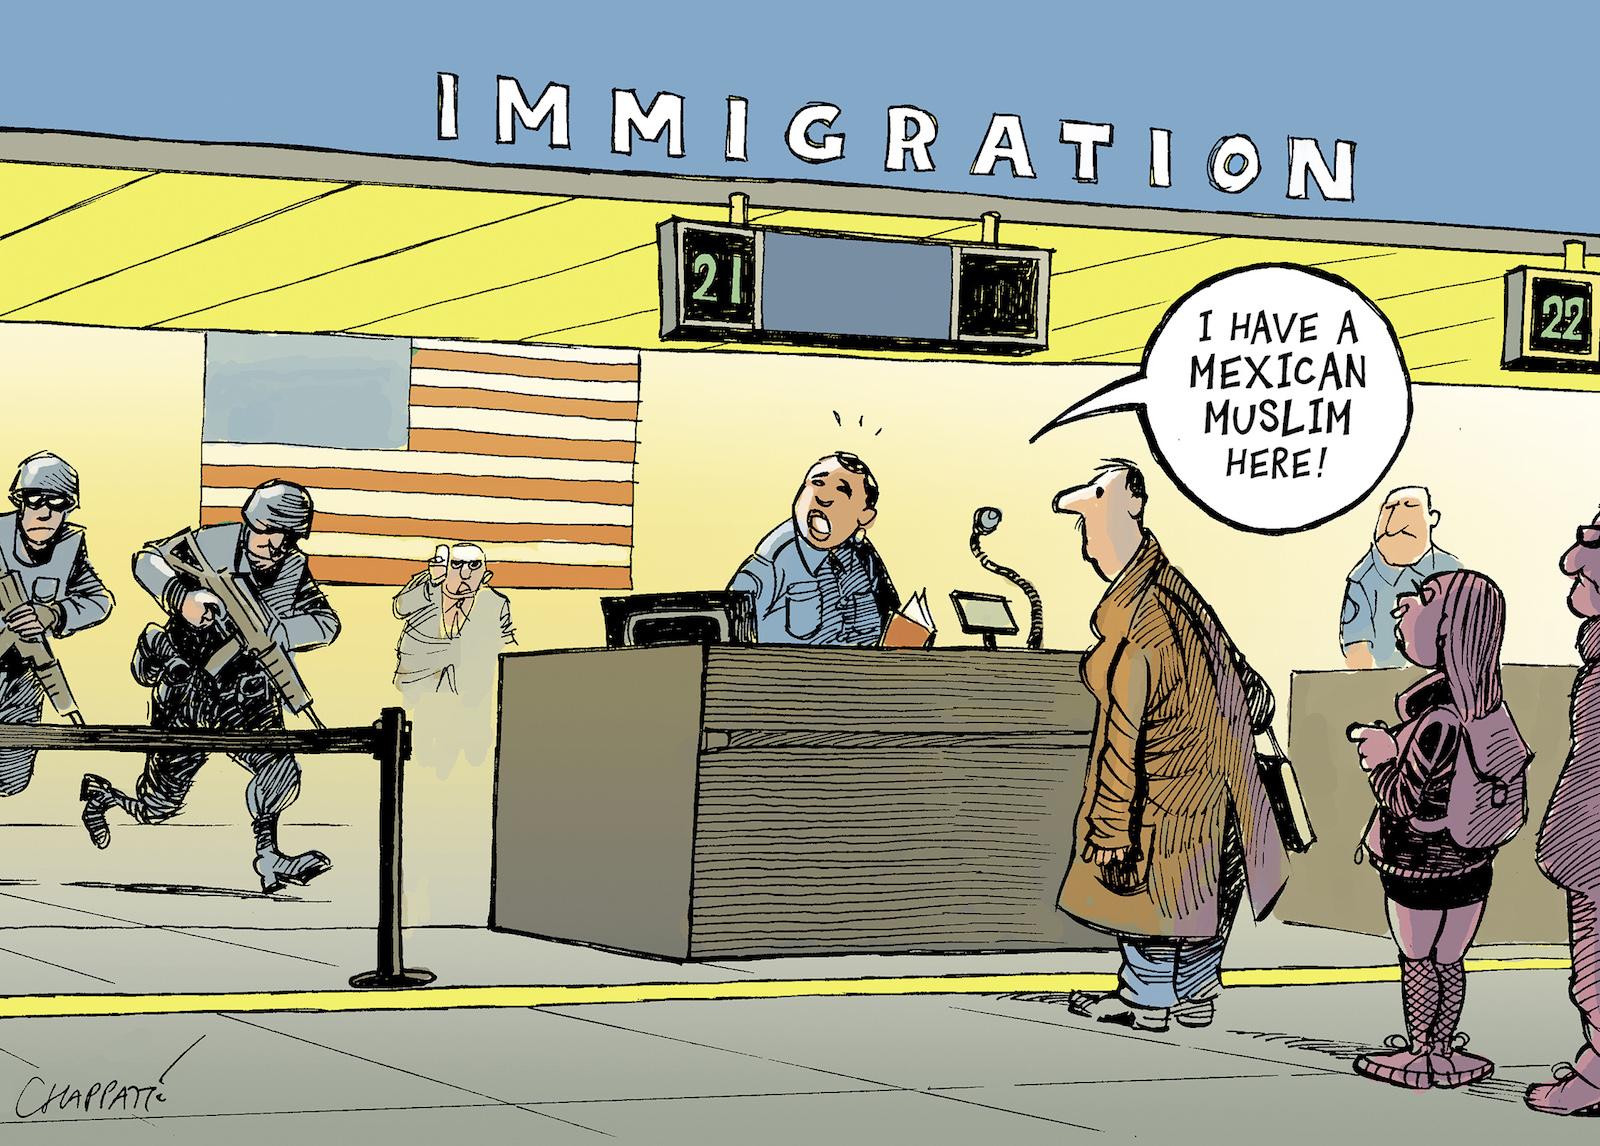 Immigration restrictions